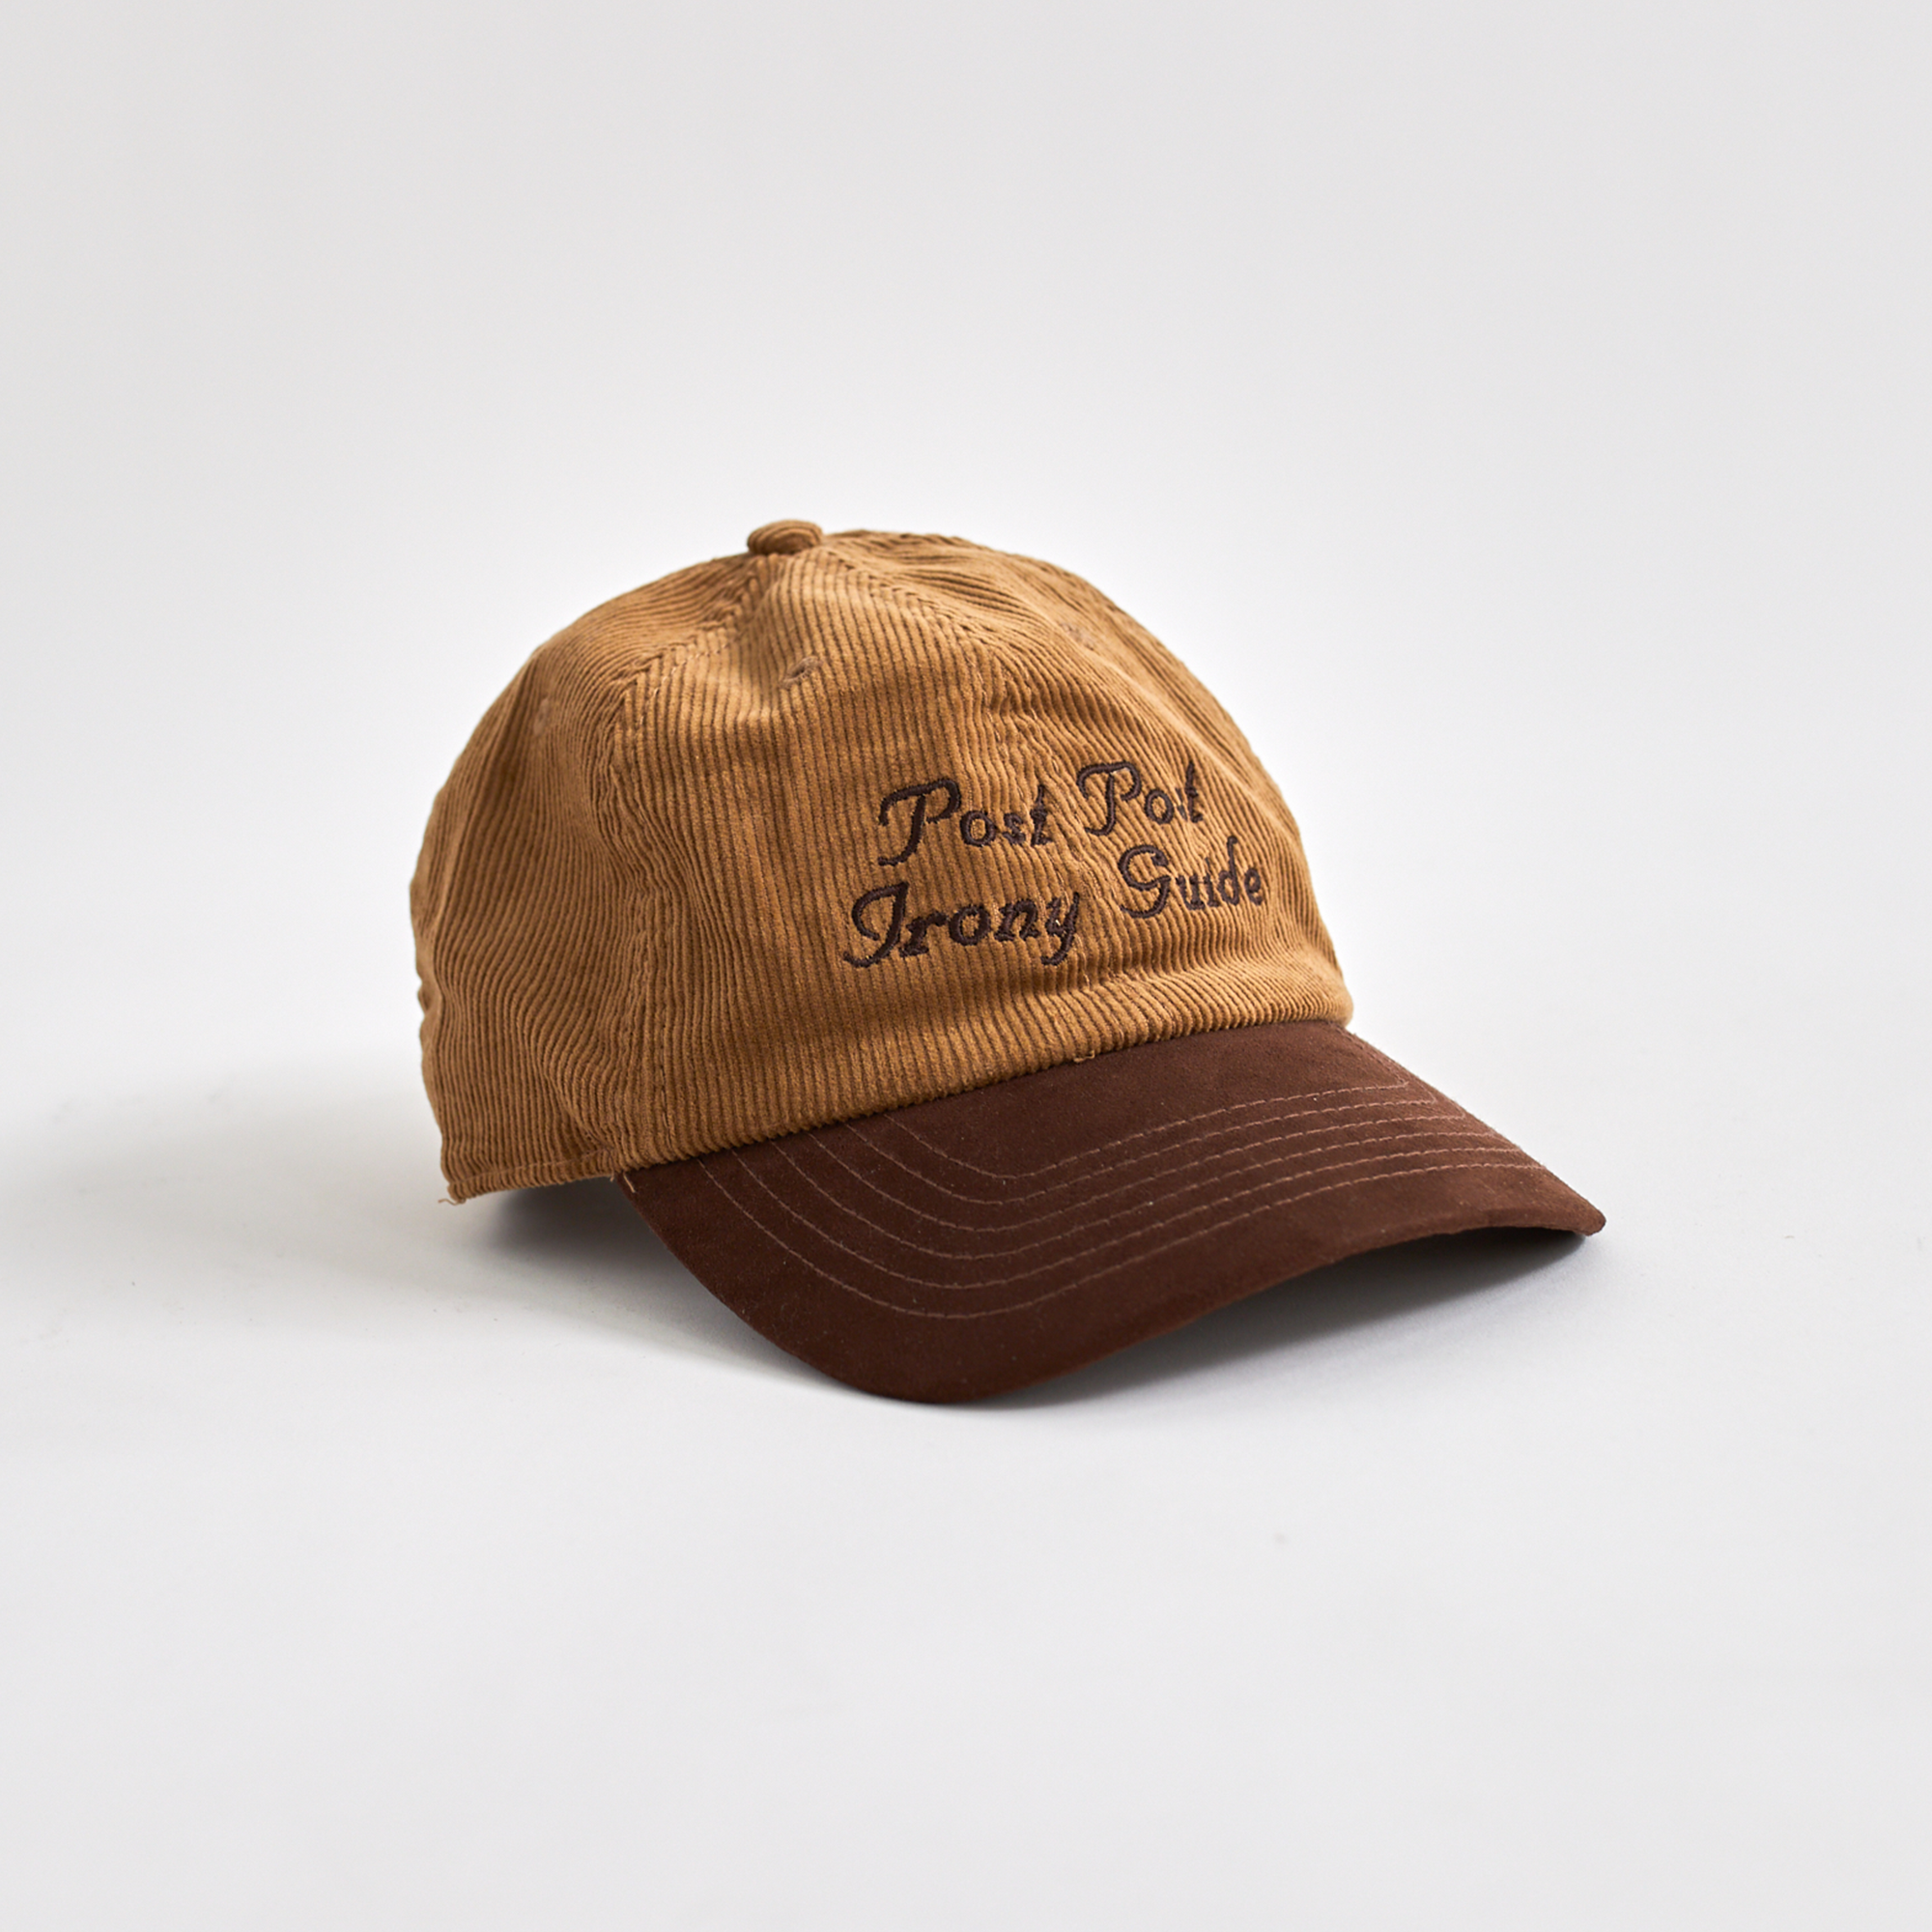 Post Post Irony Guide (Tan Cord/Brown Suede)